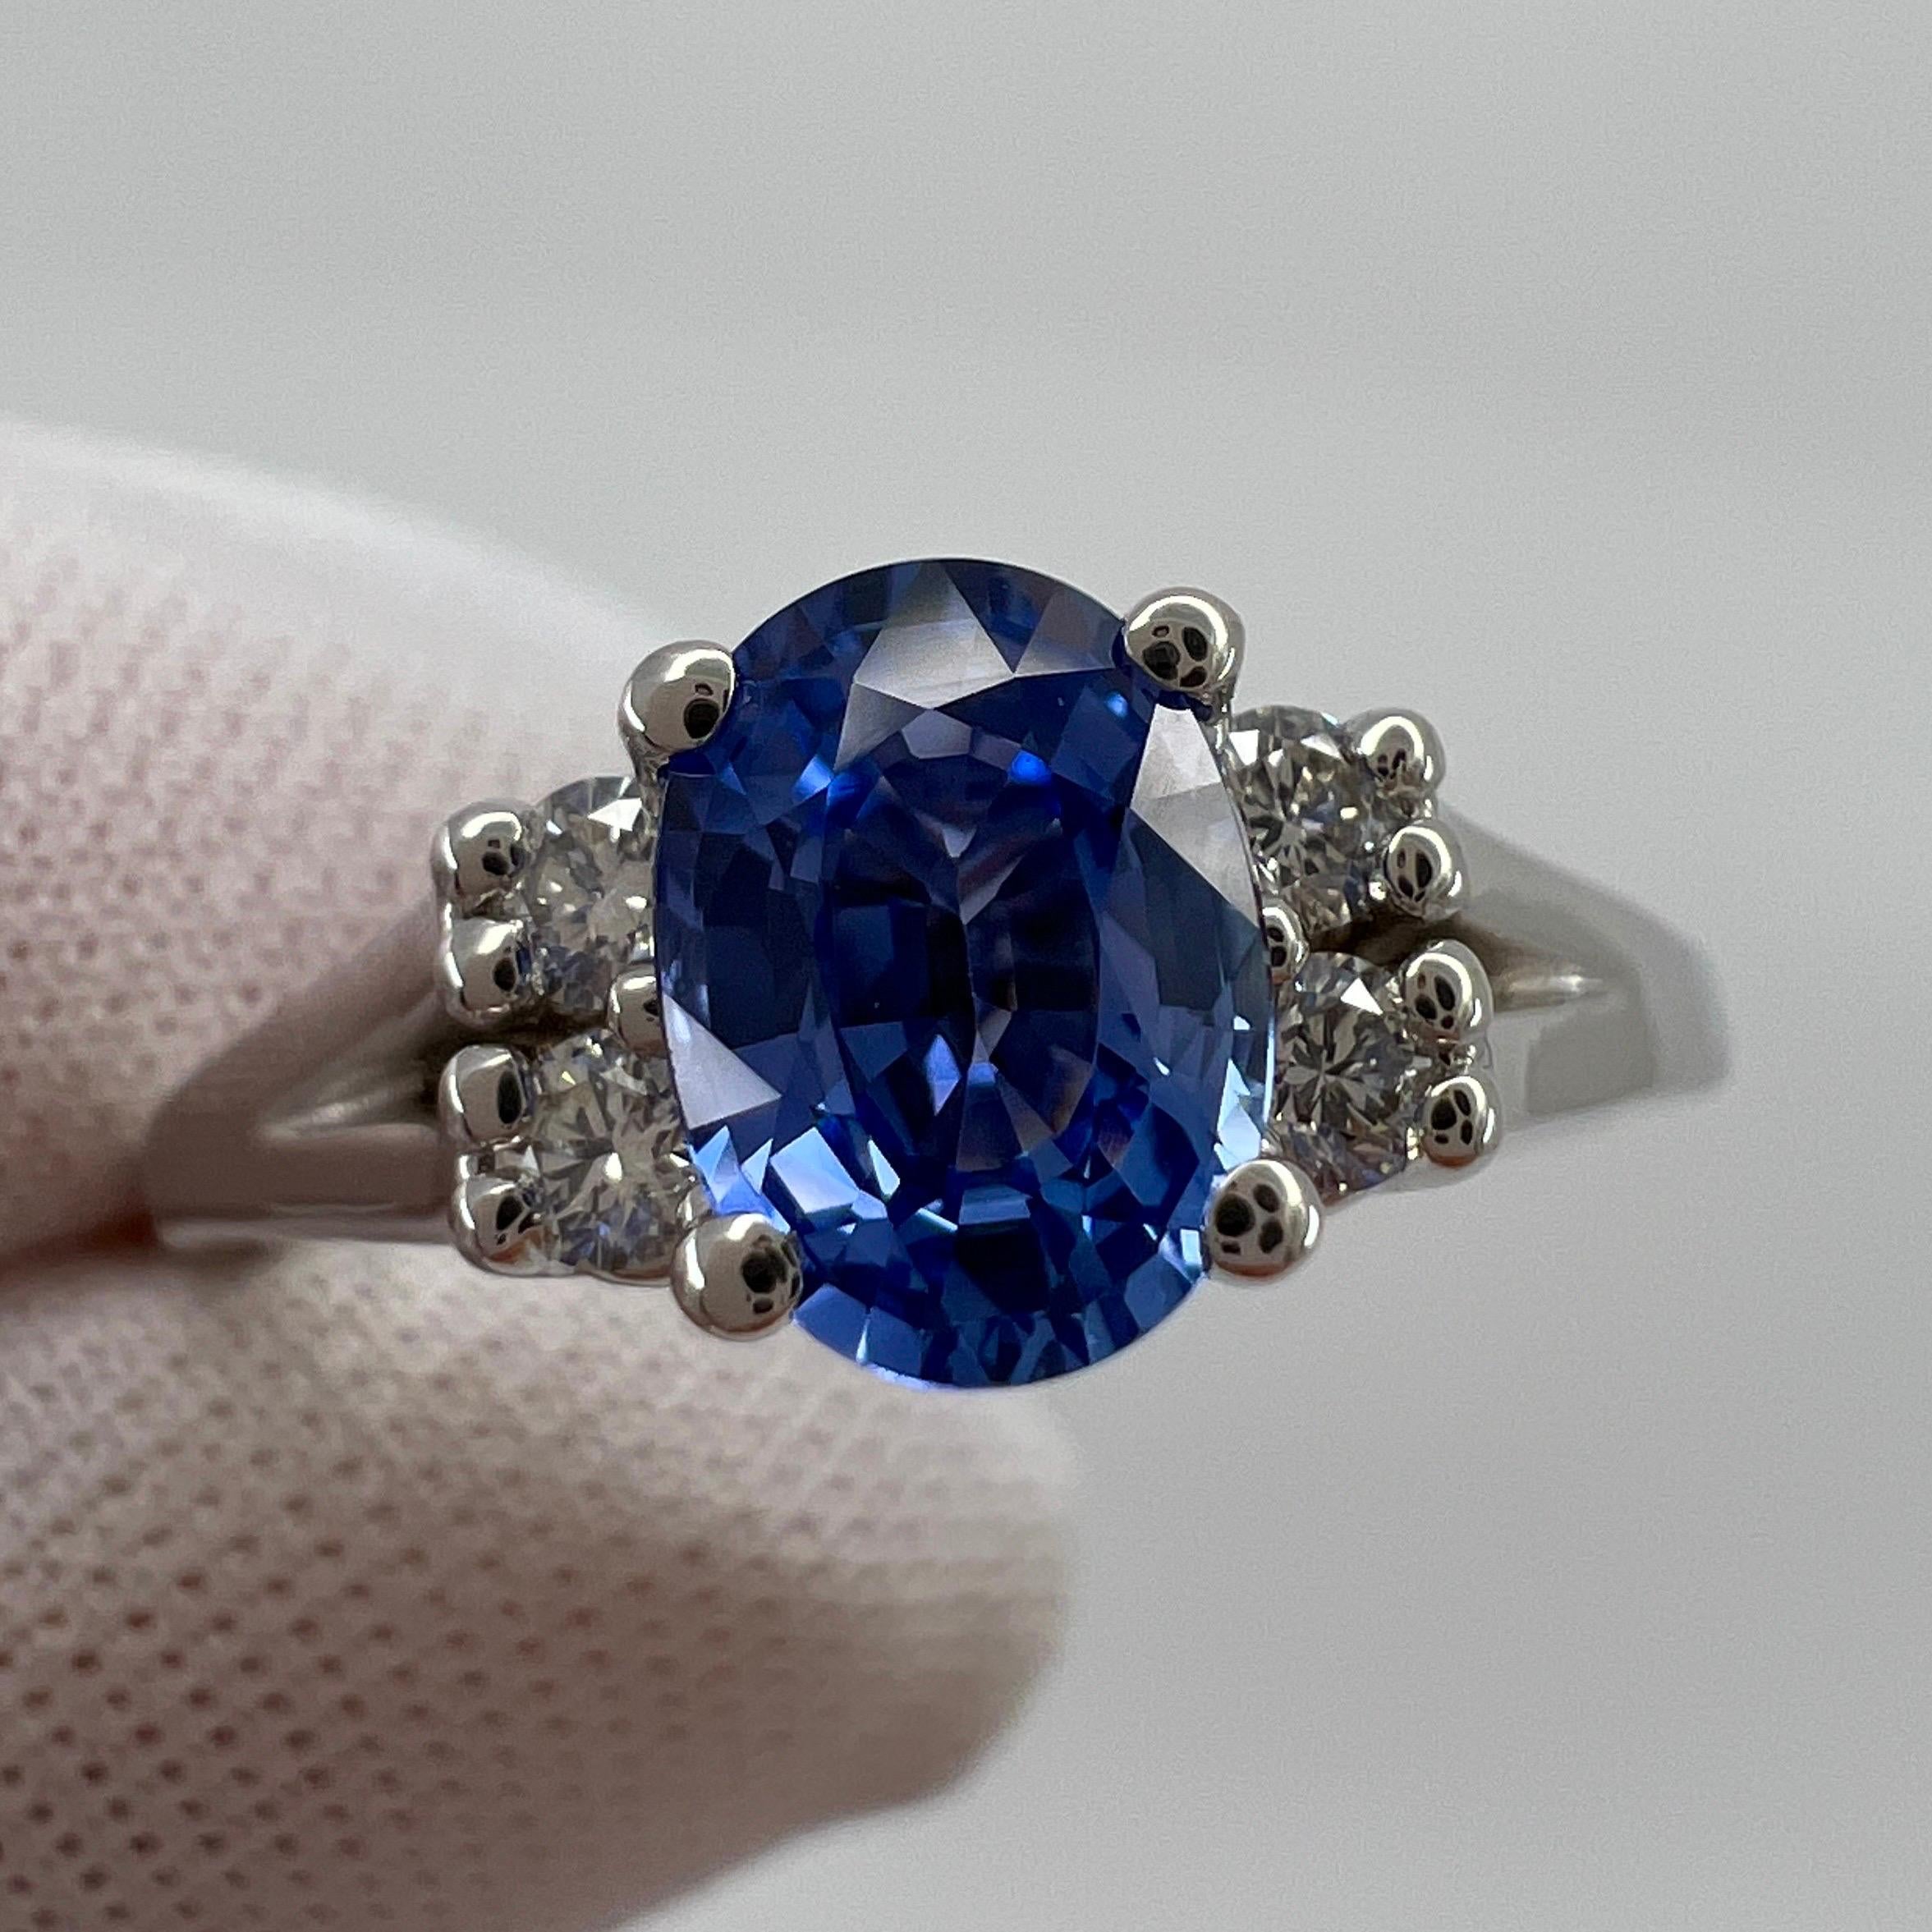 Fine Cornflower Blue Ceylon Sapphire Oval Cut 18k White Gold Diamond Accent Ring.

1.06 Carat sapphire with a stunning vivid cornflower blue colour and excellent clarity. Practically flawless.
Also has an excellent oval cut which shows lots of